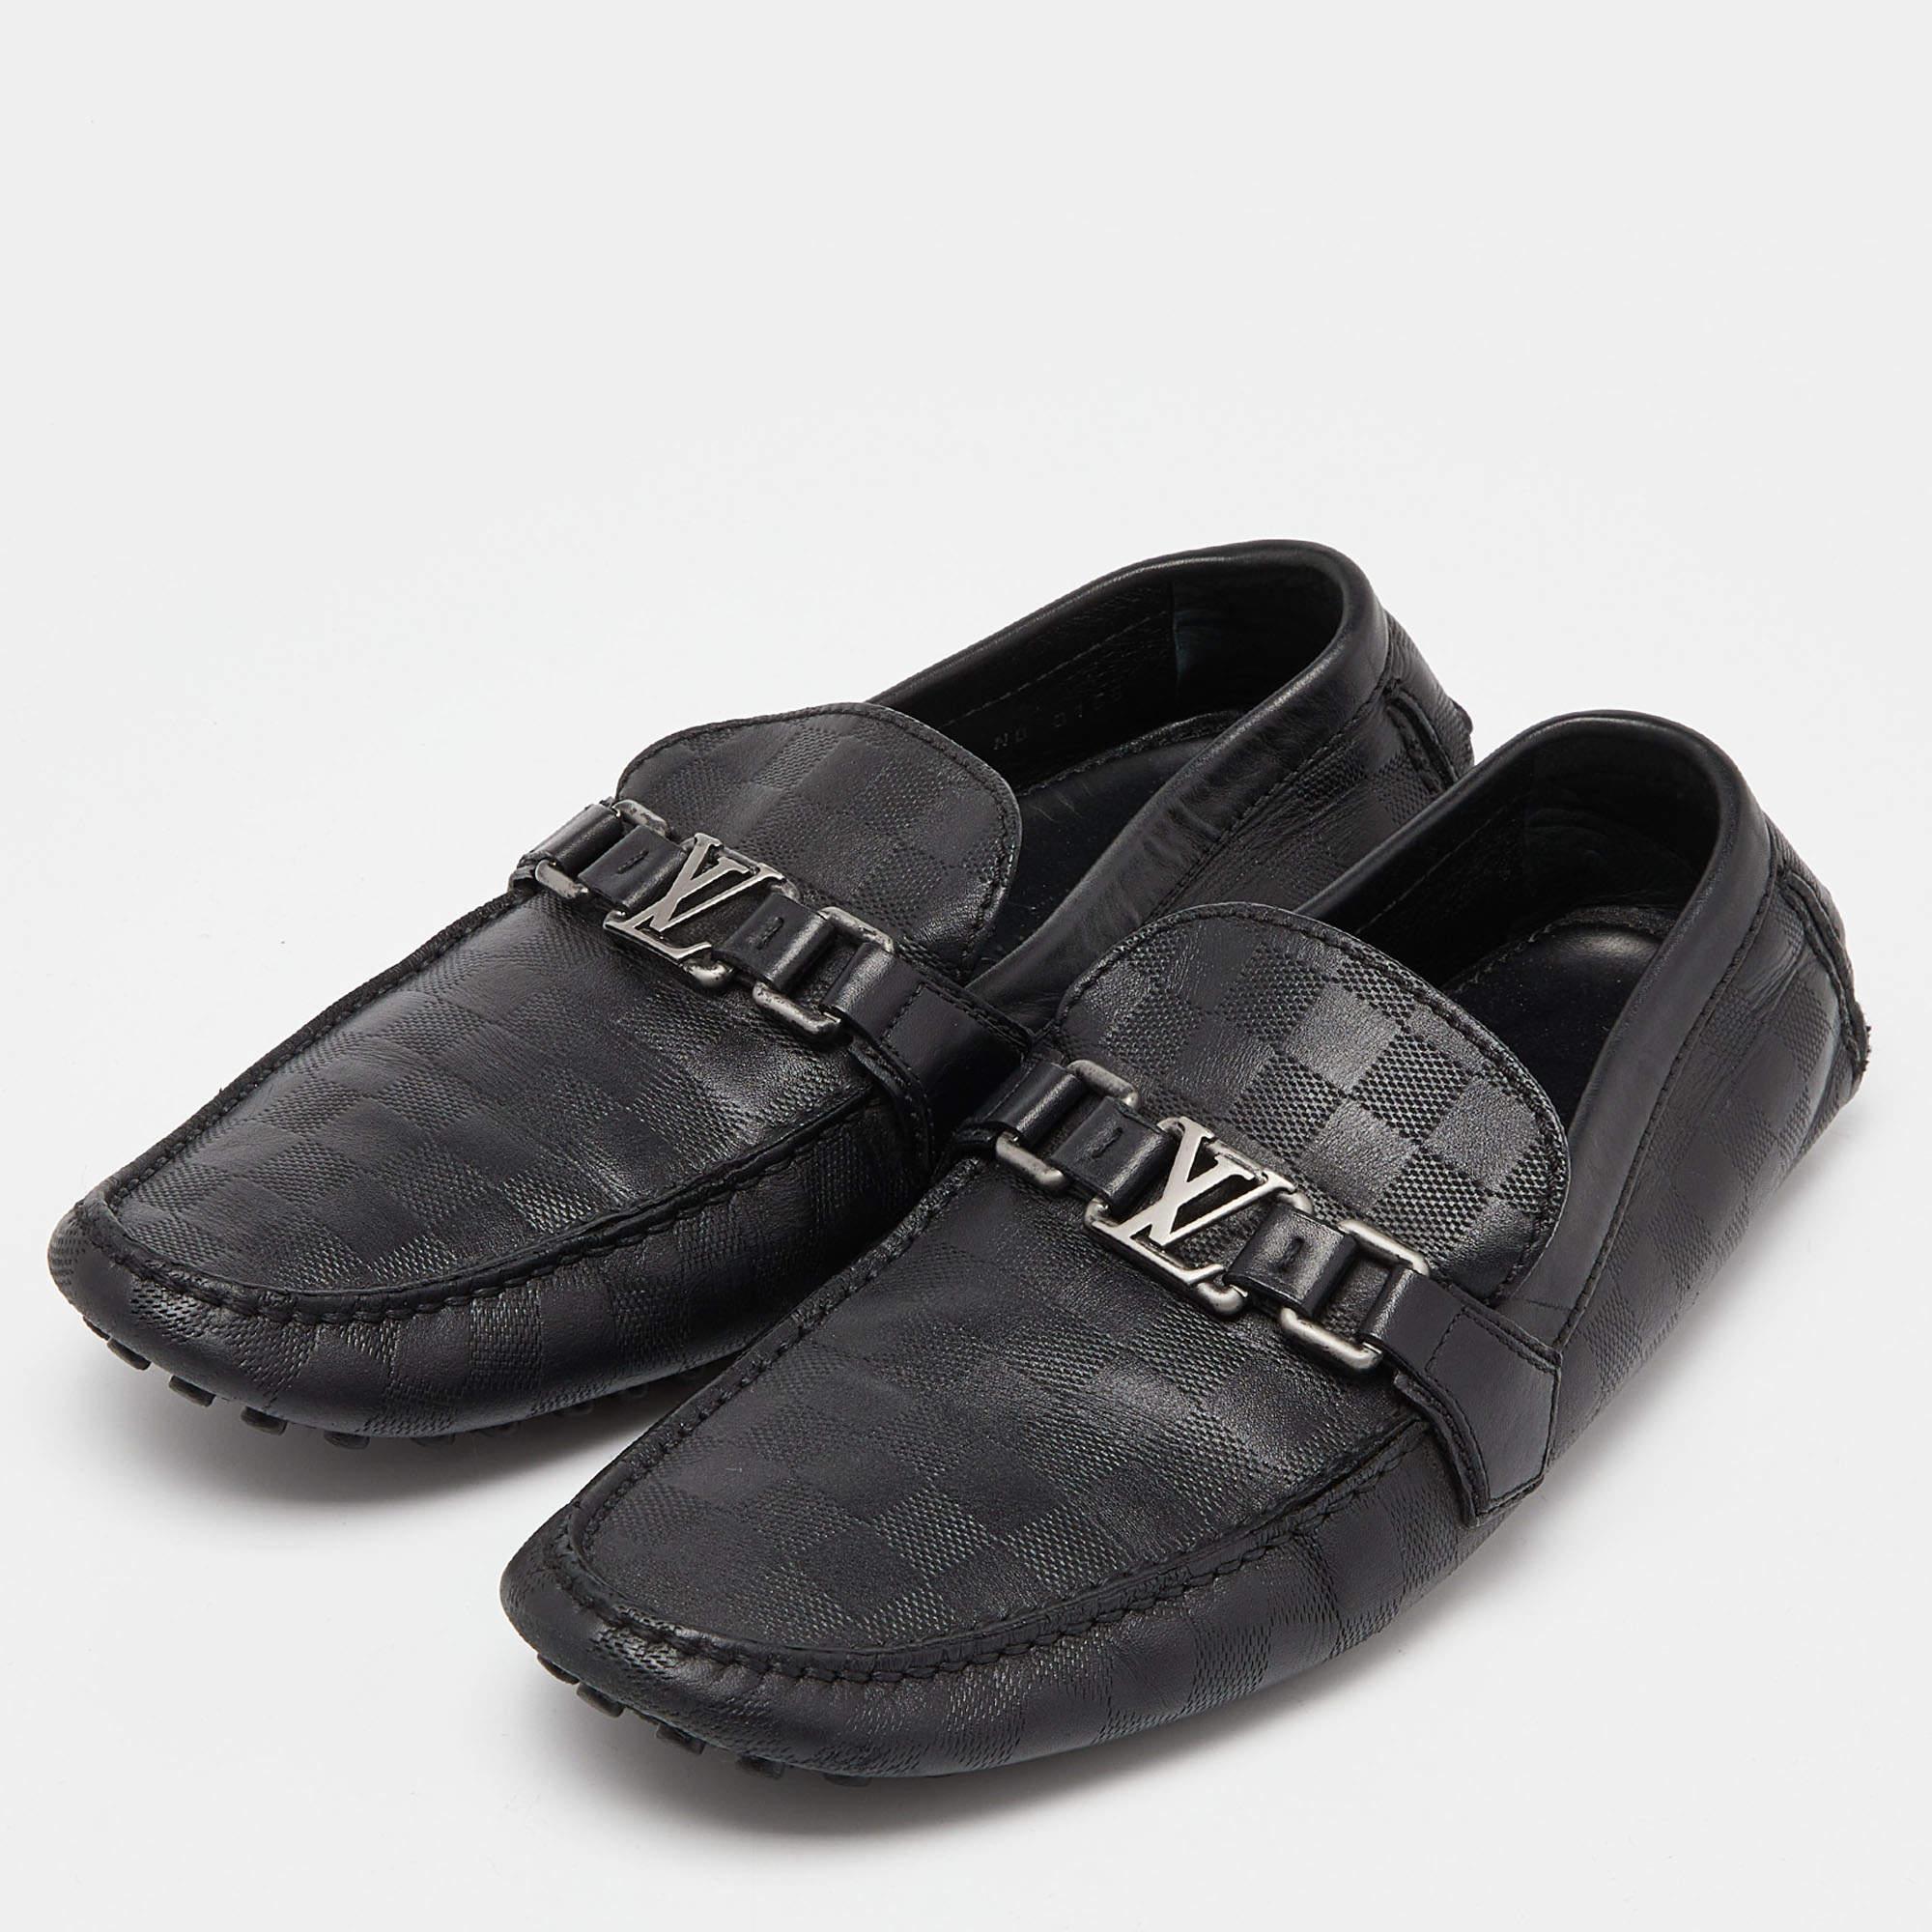 Practical, fashionable, and durable—these Louis Vuitton loafers are carefully built to be fine companions to your everyday style. They come made using the best materials to be a prized buy.

